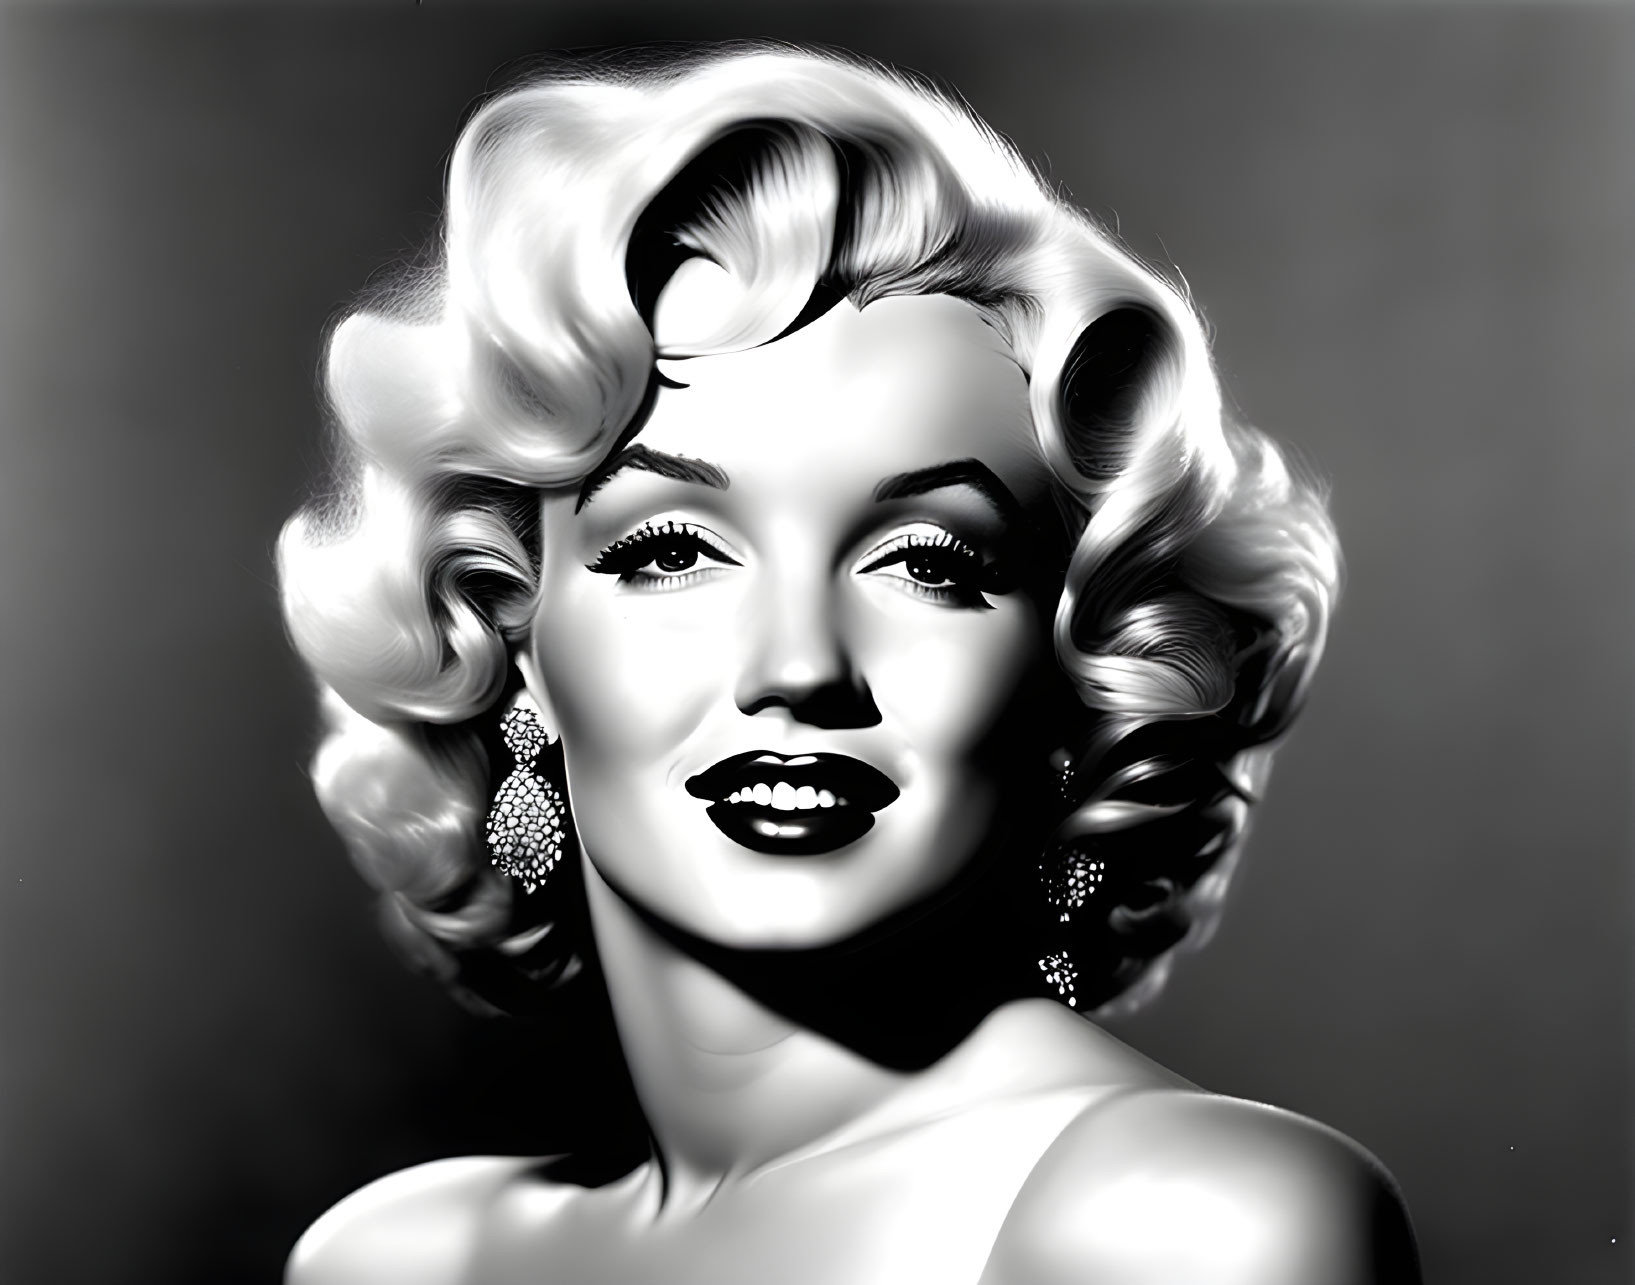 Monochrome portrait of woman with curly blonde hair and red lipstick